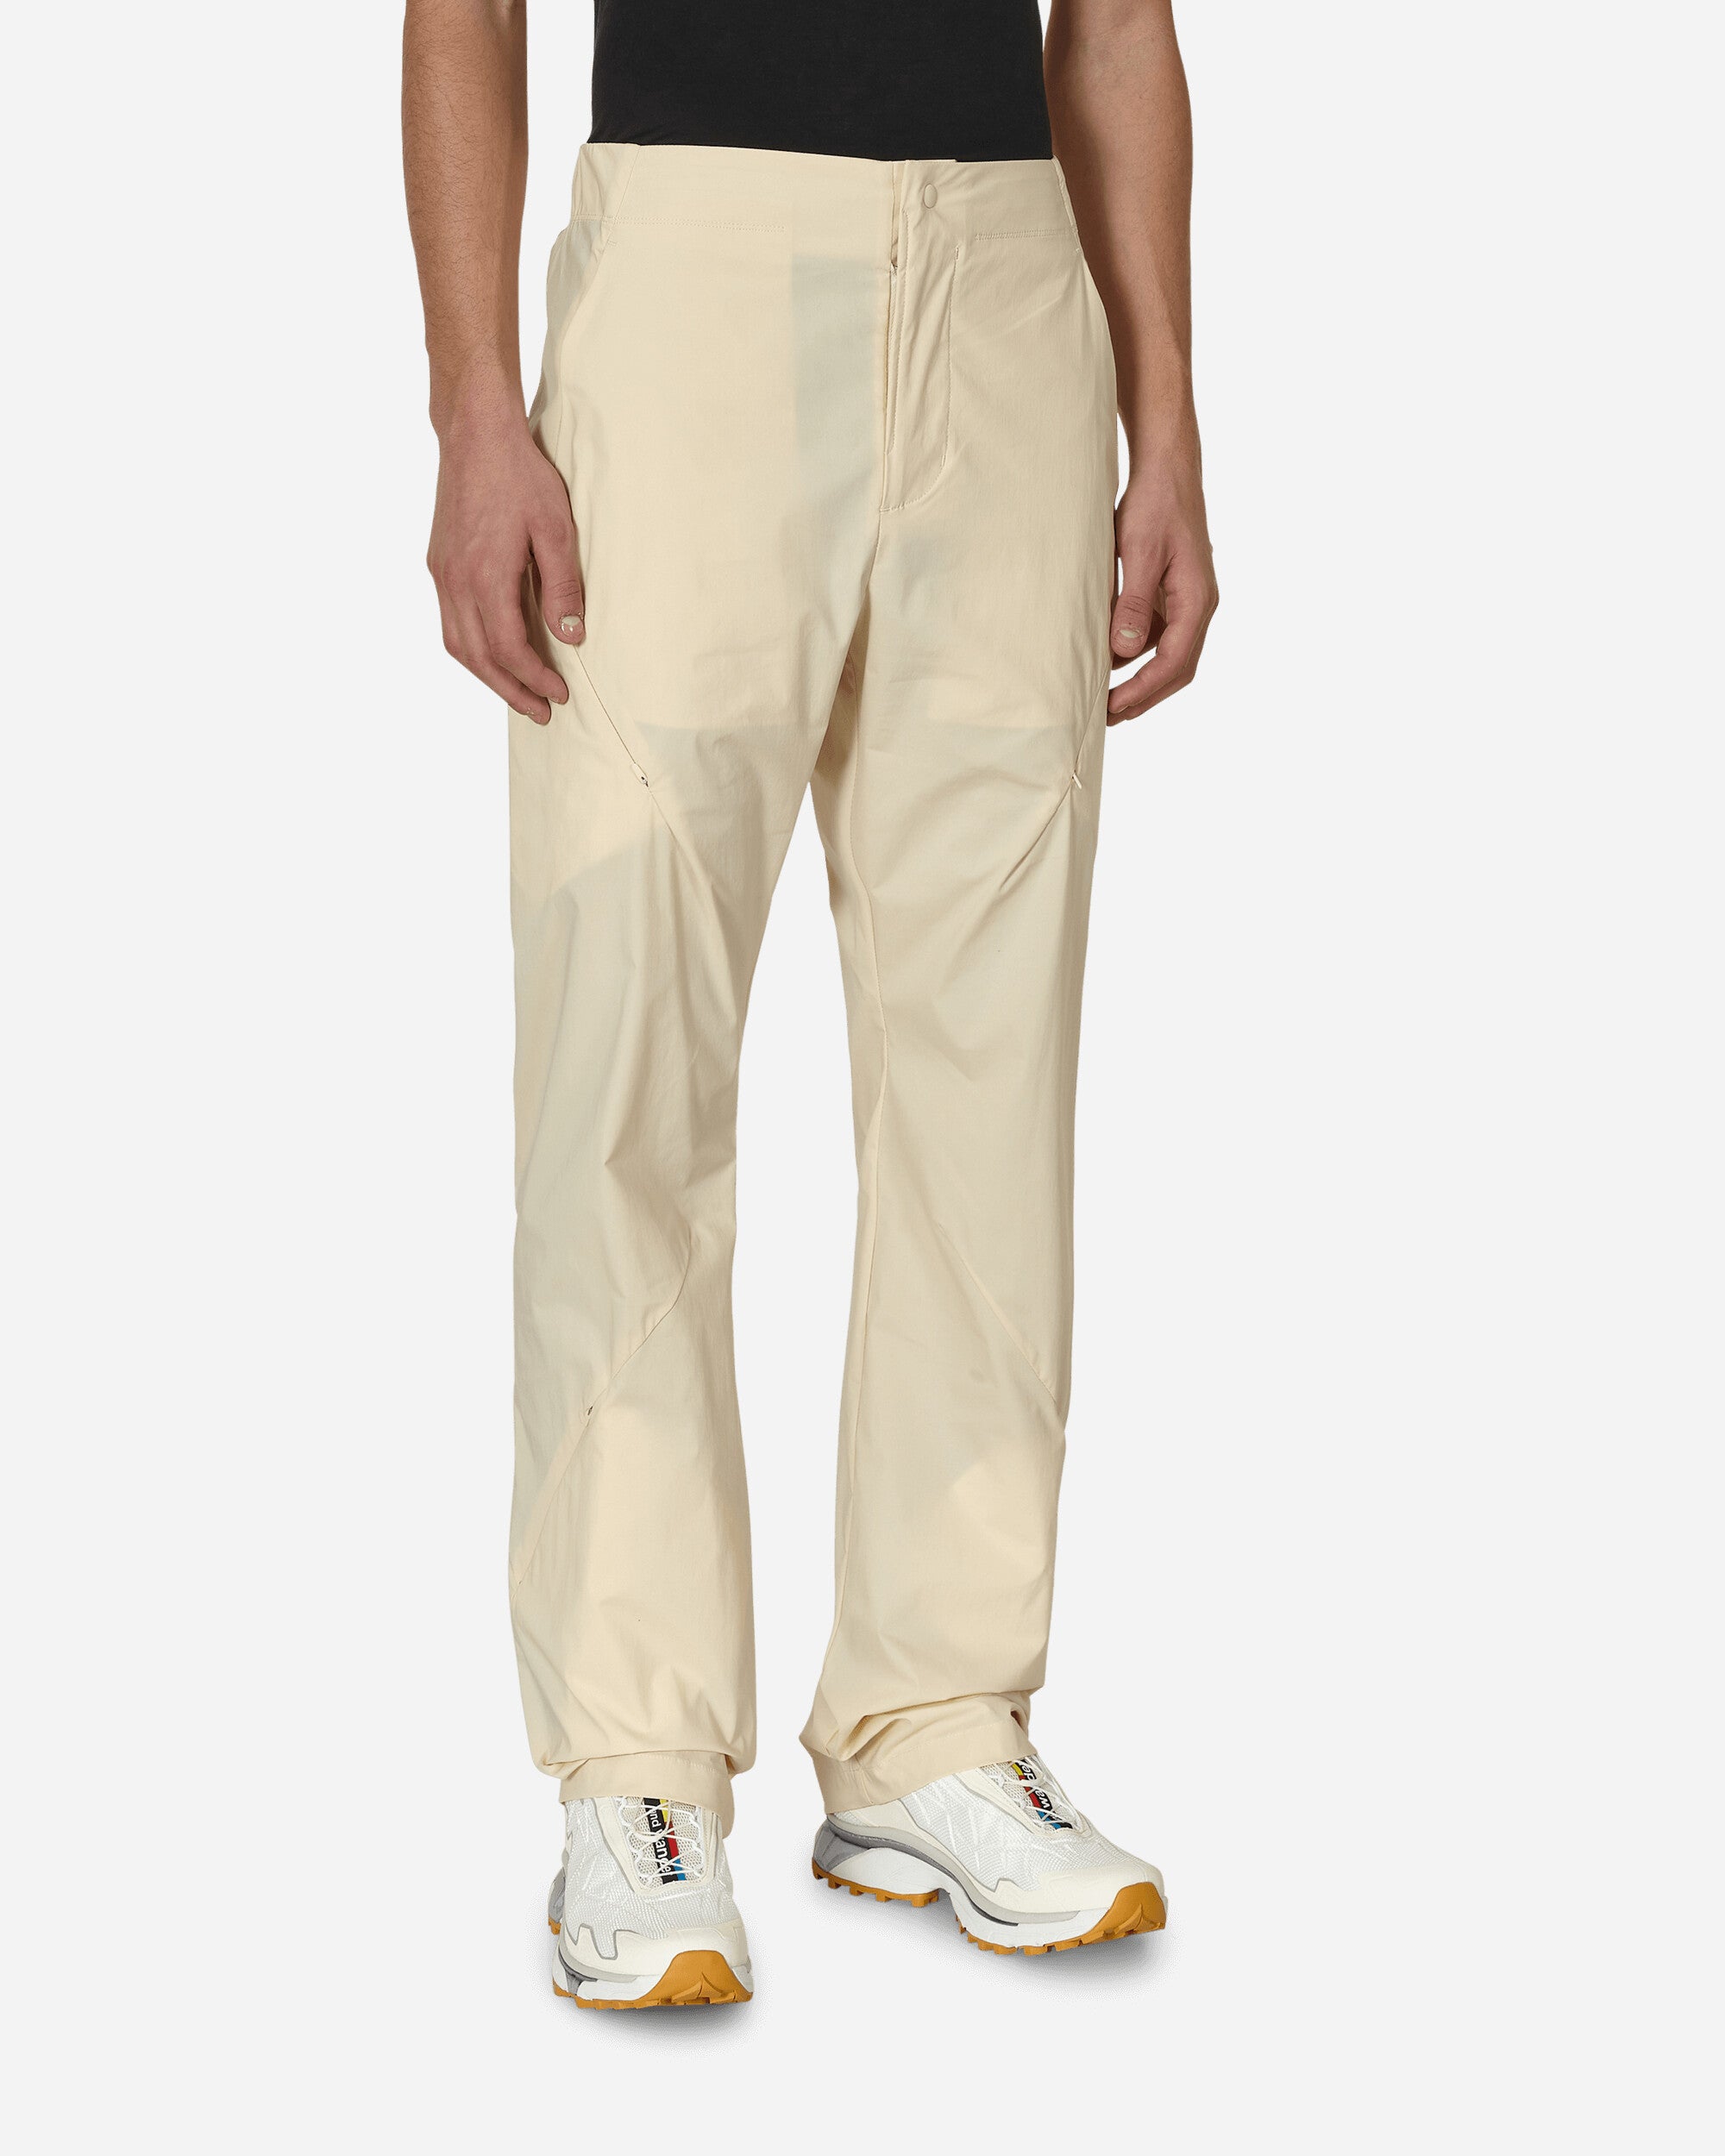 POST ARCHIVE FACTION 5.0 TROUSERS RIGHT | nate-hospital.com